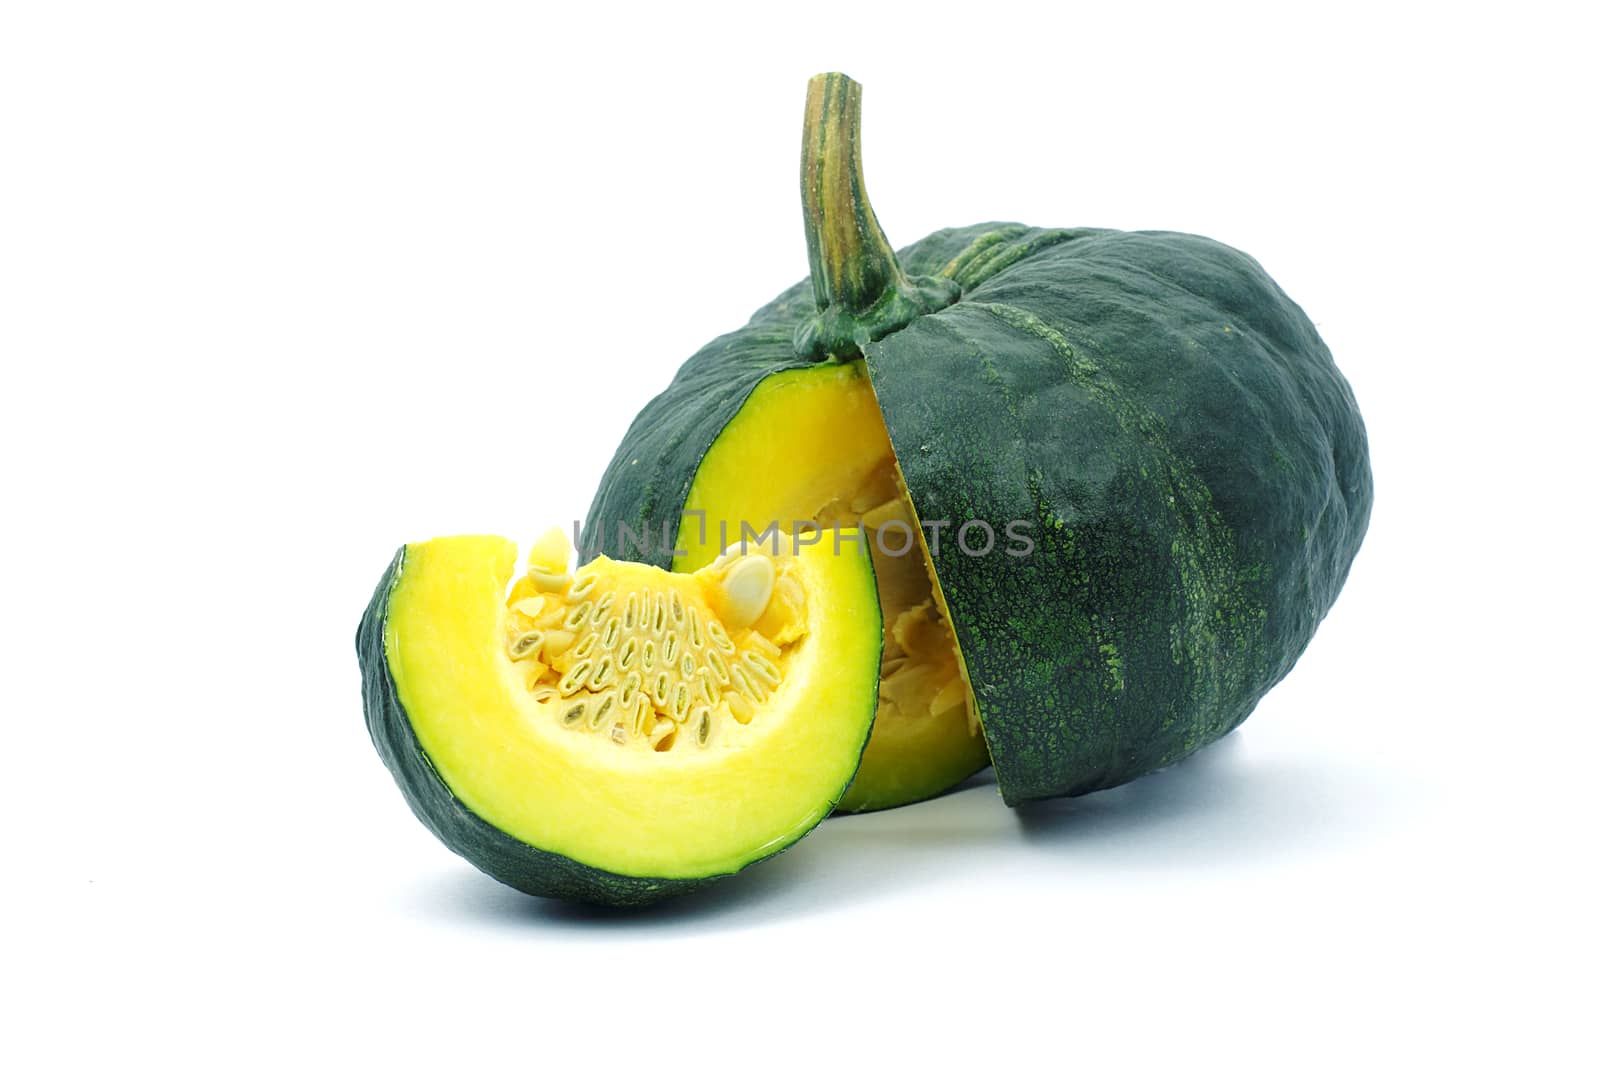 A yellow piece of pumpkin and green pumpkin on white background by ninelittle